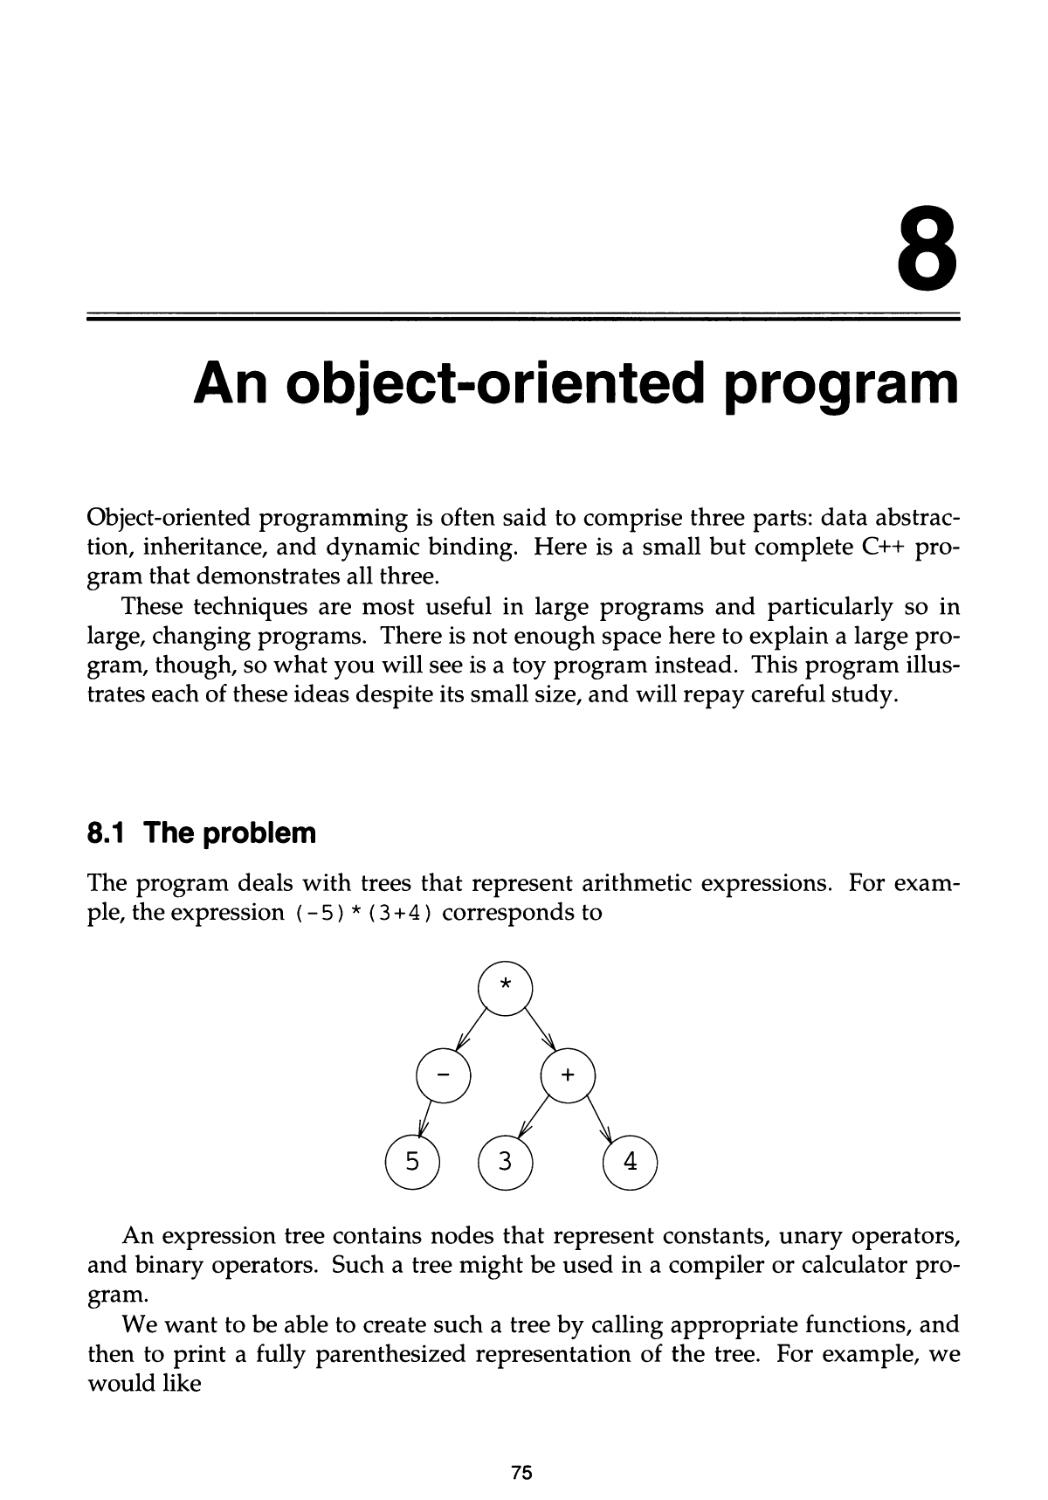 8.2 An object-oriented solution